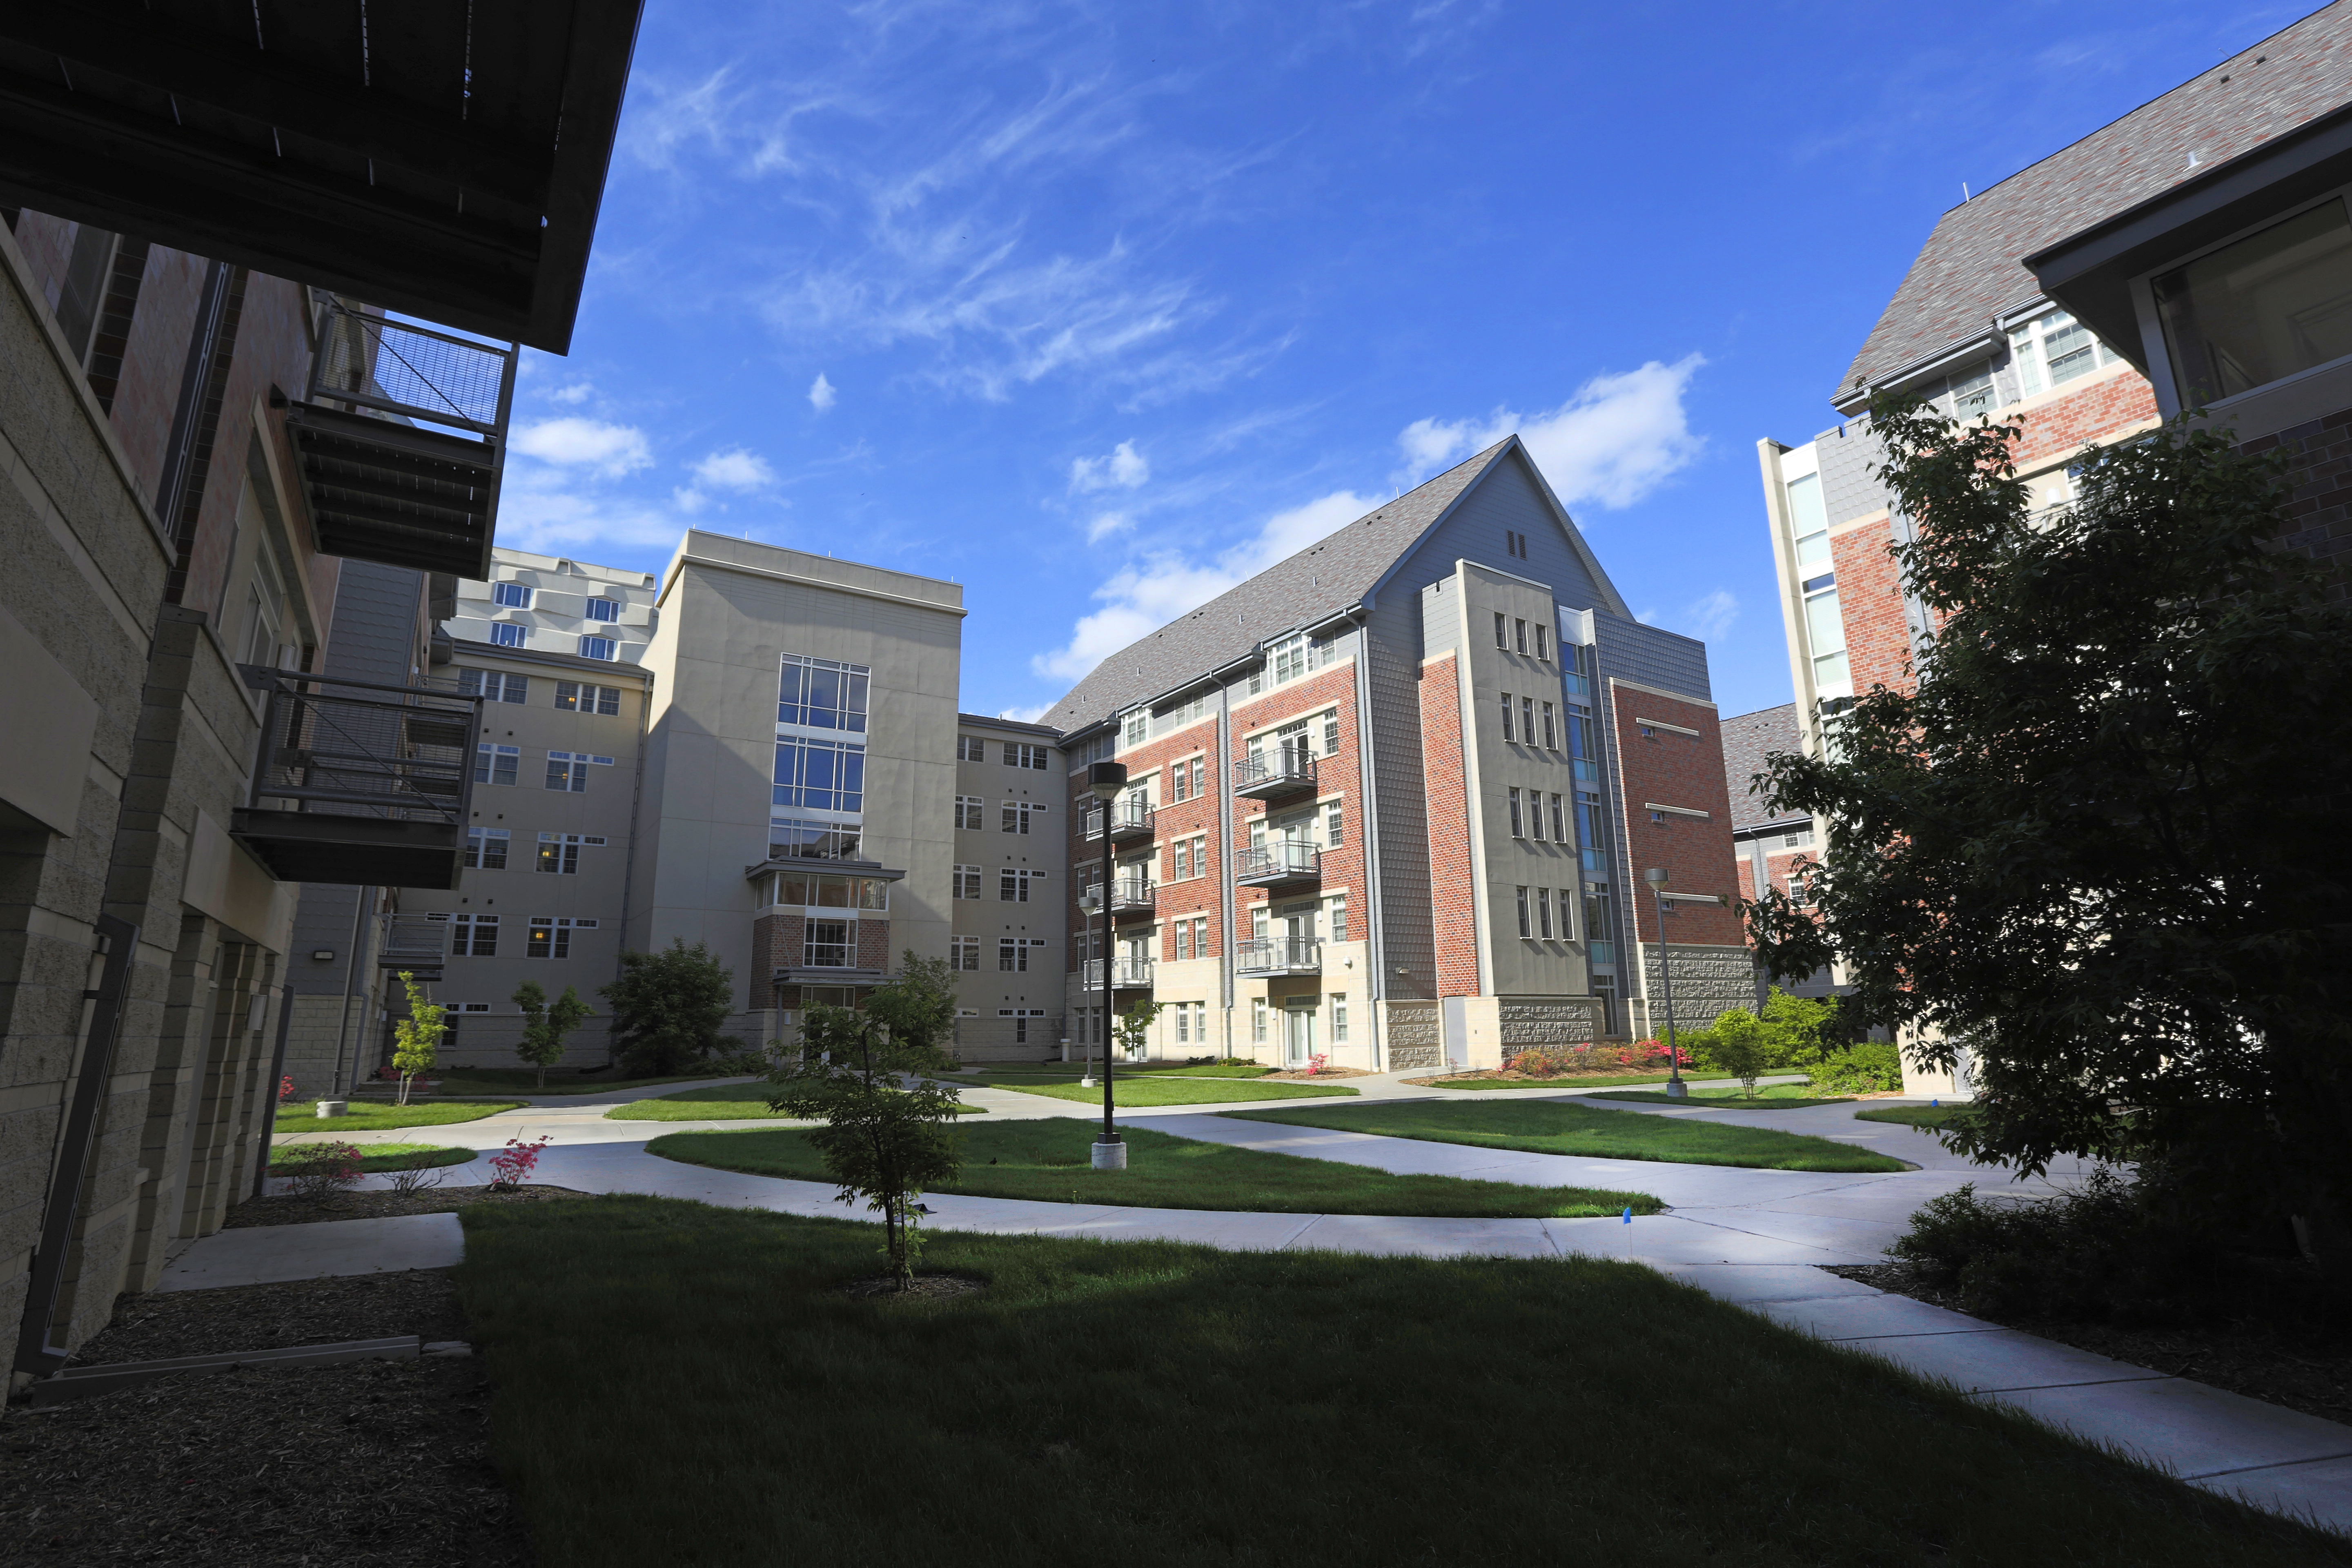 The Village is an apartment-style housing complex located on the north side of City Campus.